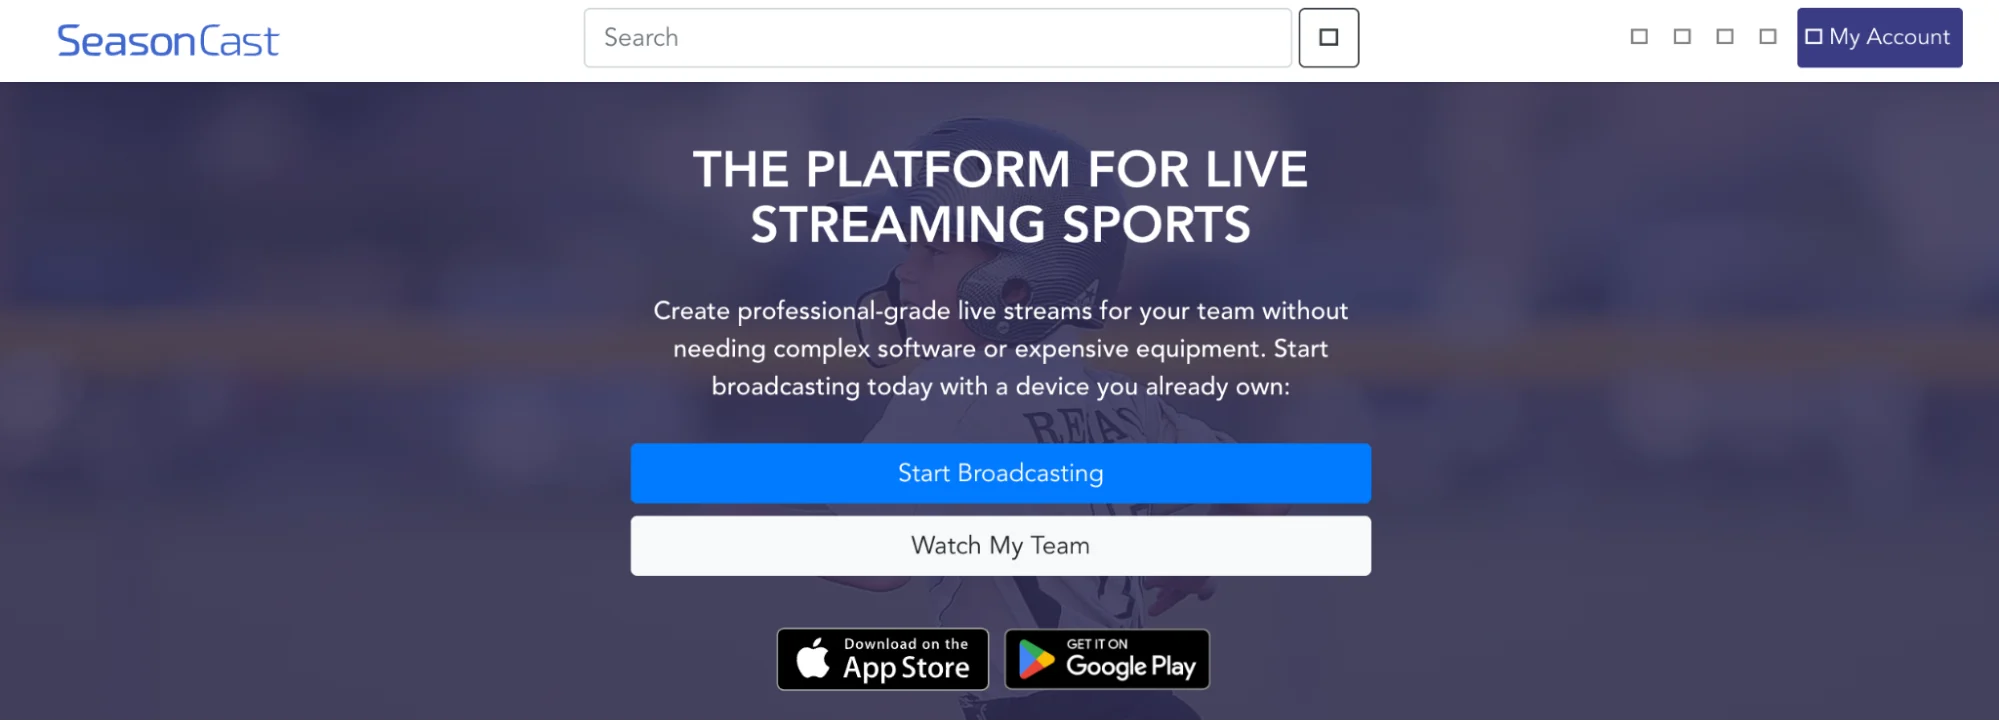 season cast app for youth sports live streaming